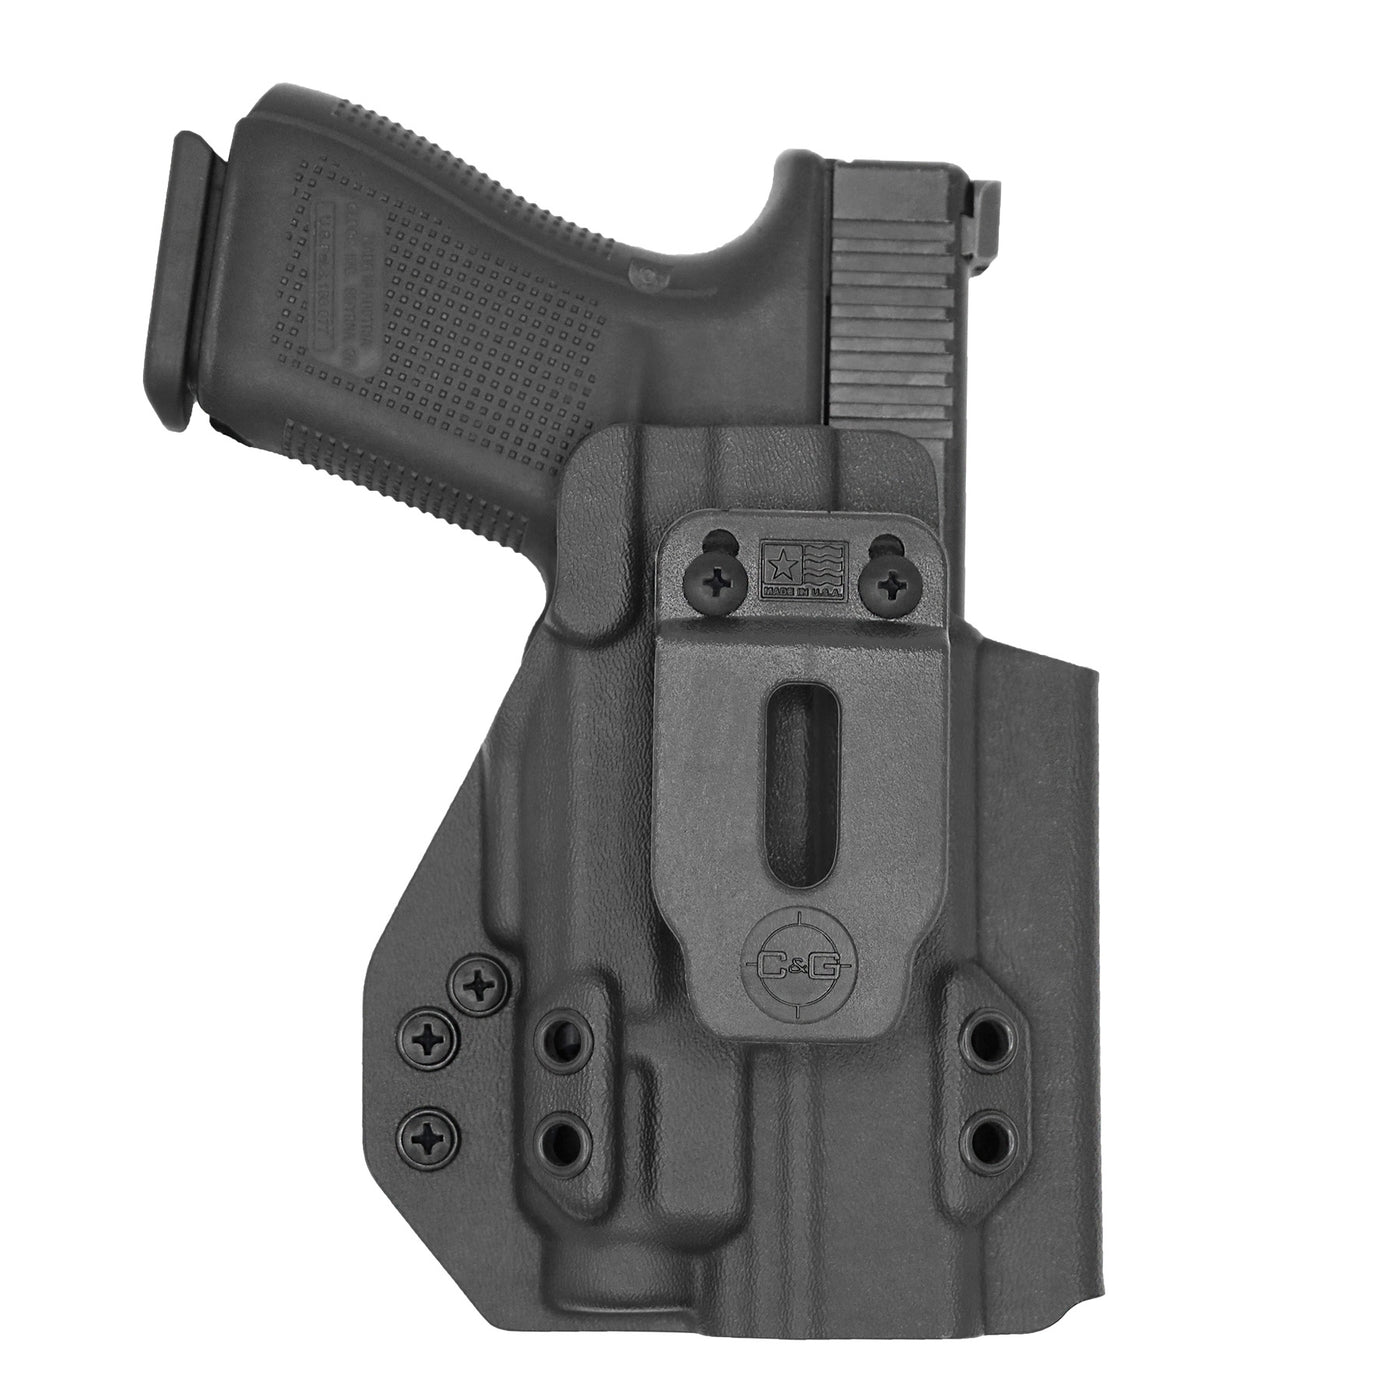 C&G Holsters custom IWB Tactical Shadow Systems Streamlight TLR7 holstered